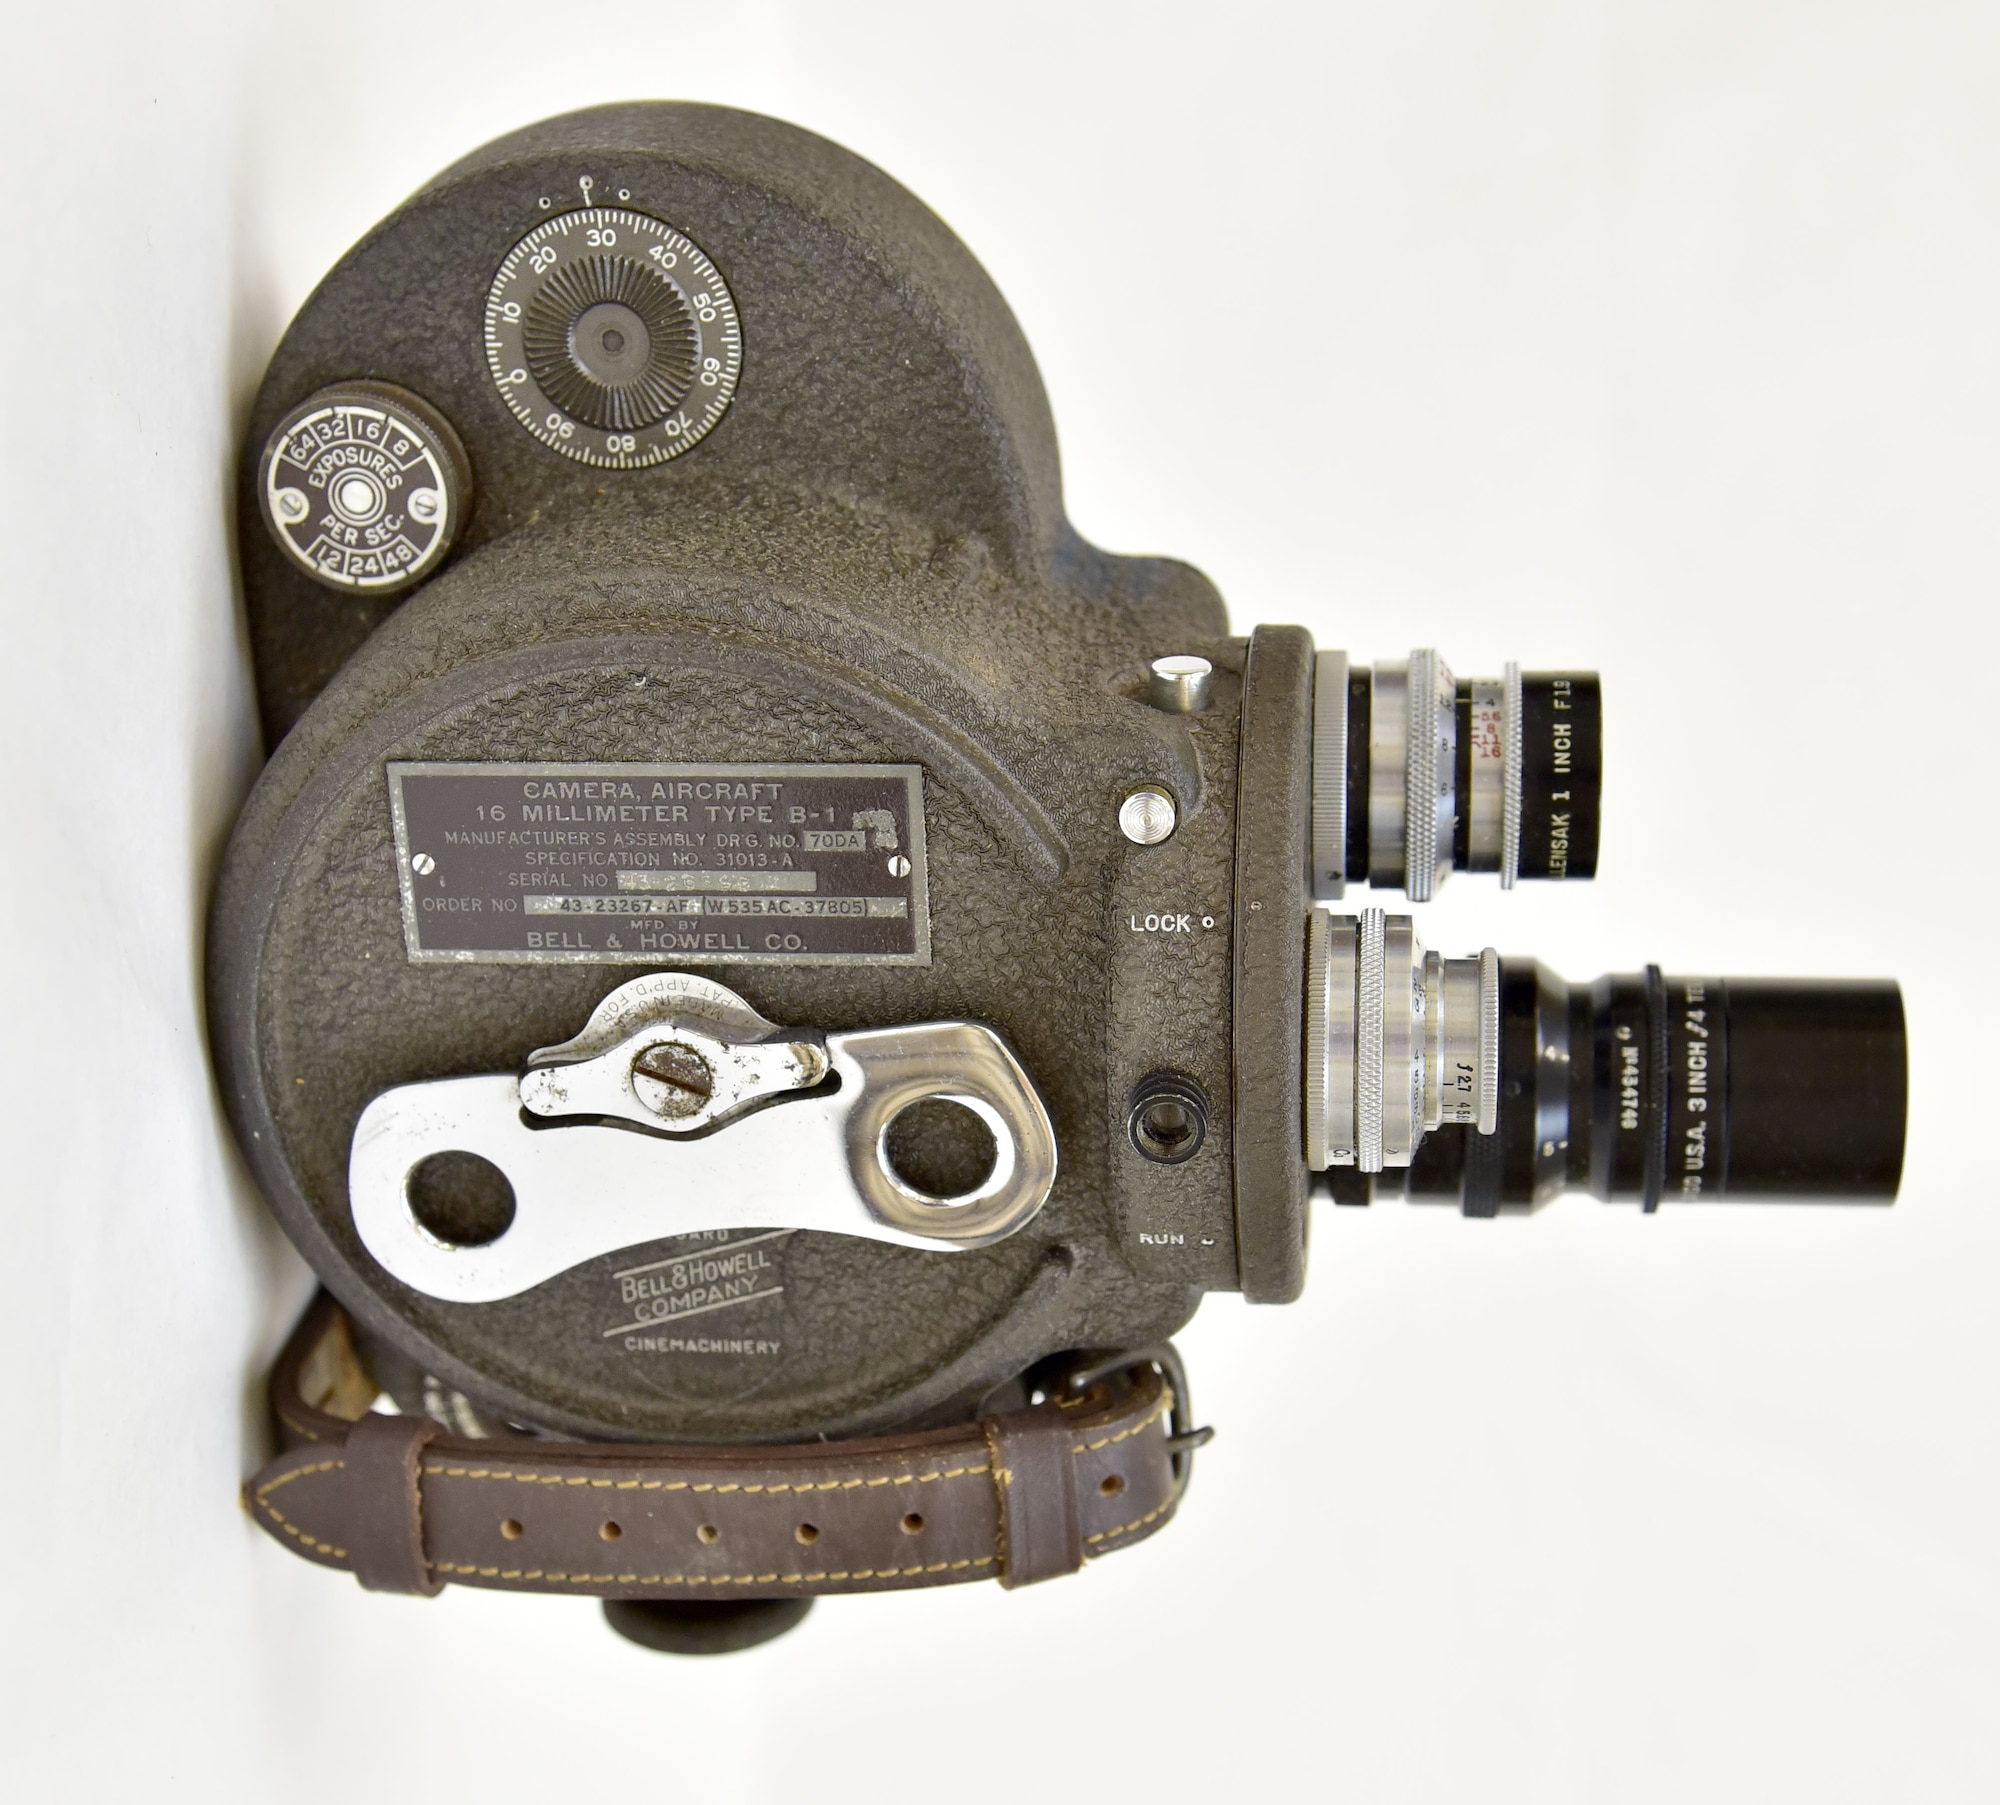 Plans call for this artifact to be displayed near the B-17F Memphis Belle™ as part of the new strategic bombardment exhibit in the WWII Gallery, which opens to the public on May 17, 2018.
Handheld 16mm movie camera used during the “shuttle bombing” raids, when USAAF heavy bombers flew from bases in the western Soviet Union.